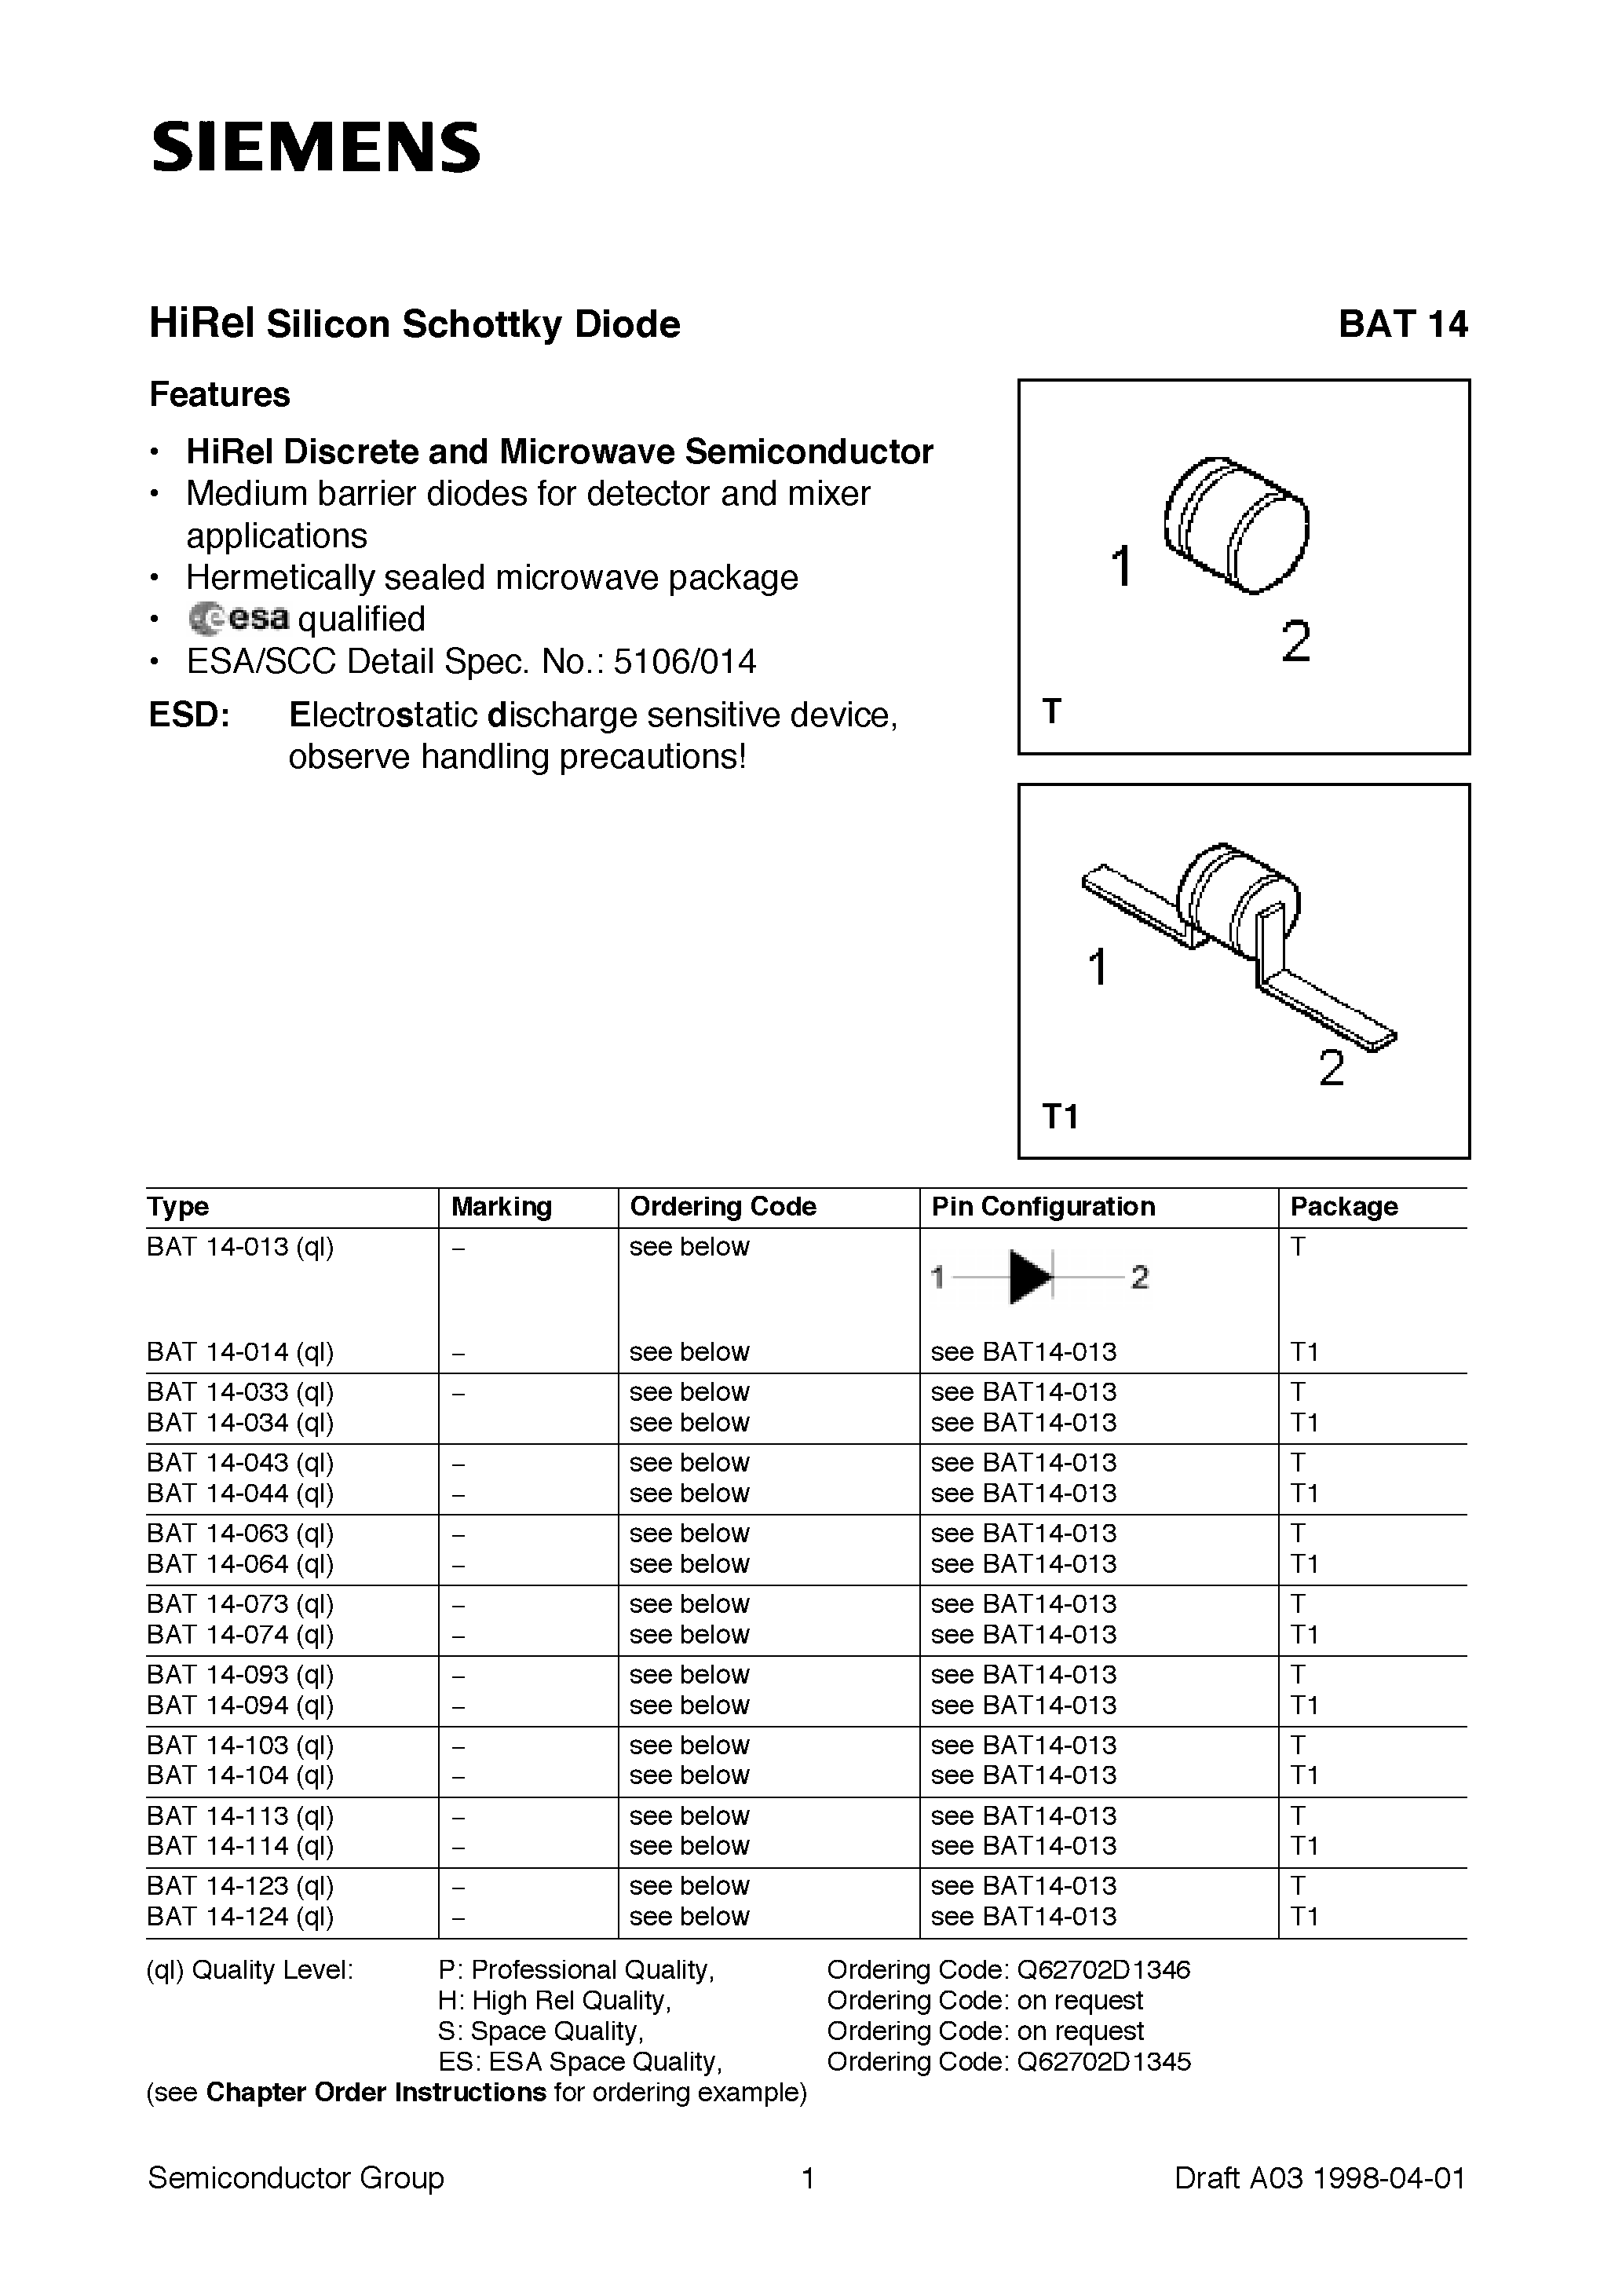 Datasheet BAT14-033 - HiRel Silicon Schottky Diode (HiRel Discrete and Microwave Semiconductor Medium barrier diodes for detector and mixer applications) page 1